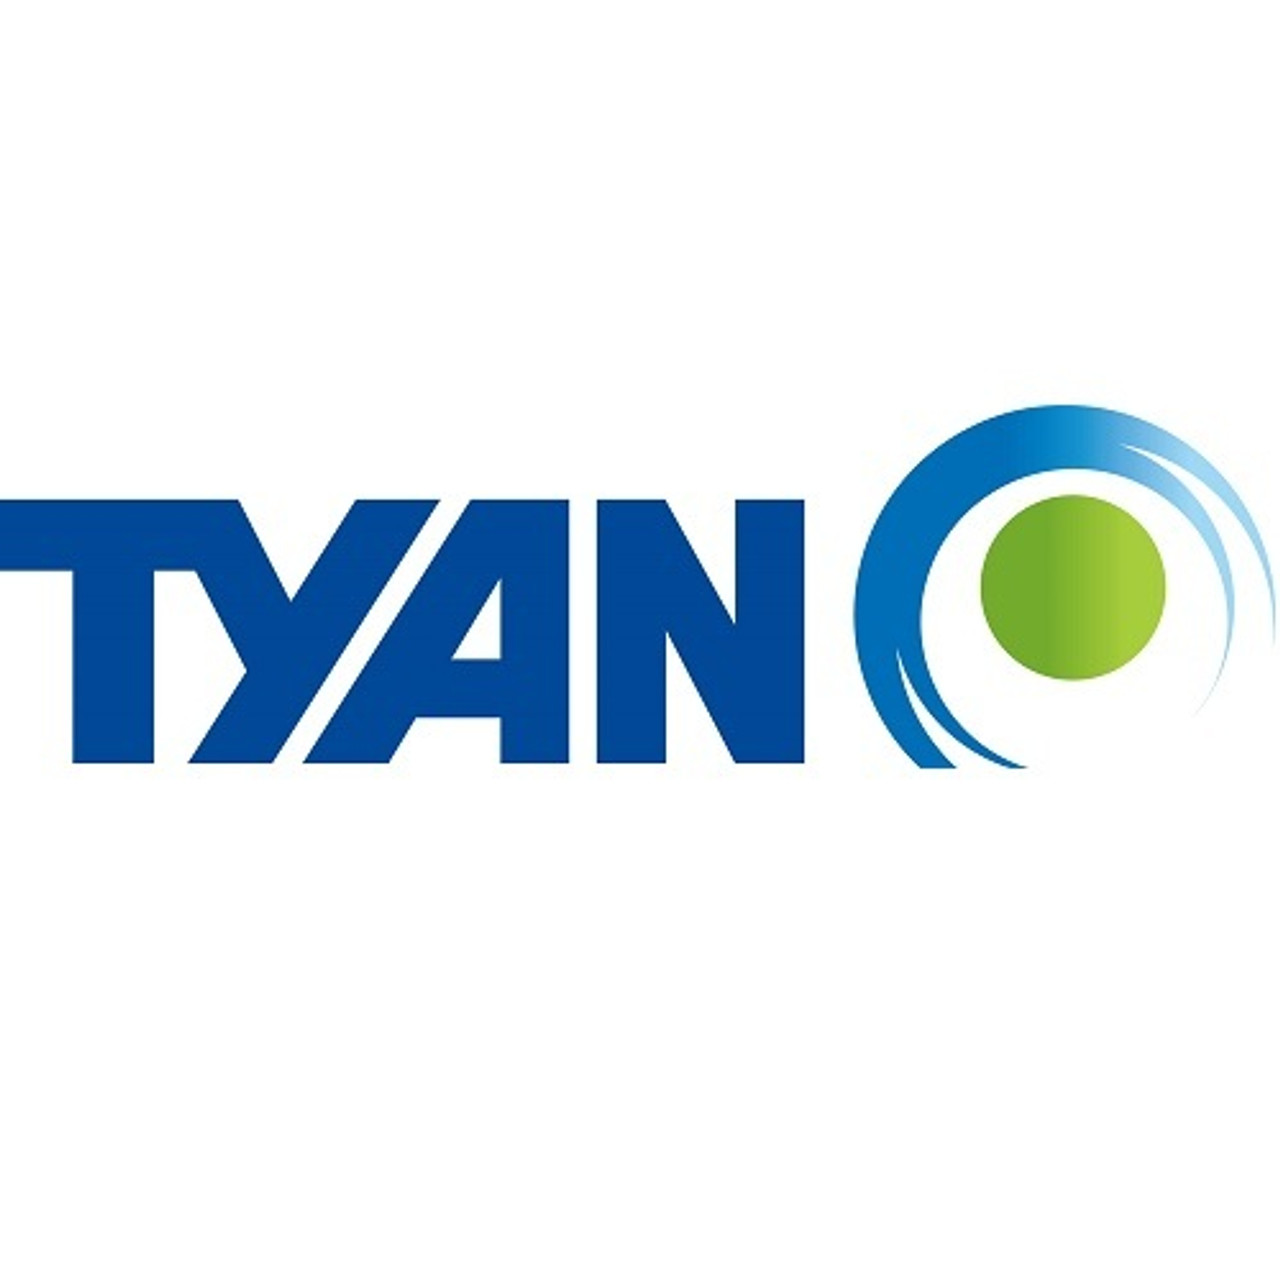 Tyan Intel 5520 / ICH10R,Supports up to 2 Intel Xeon Processor 5500/ 5600 Series processor,18 DIMM Up to 144GB DDR3 800 RDIMM/ 48GB DDR3 1066 UDIMM,up to 12-3.5inch Hot-Swap HDD.